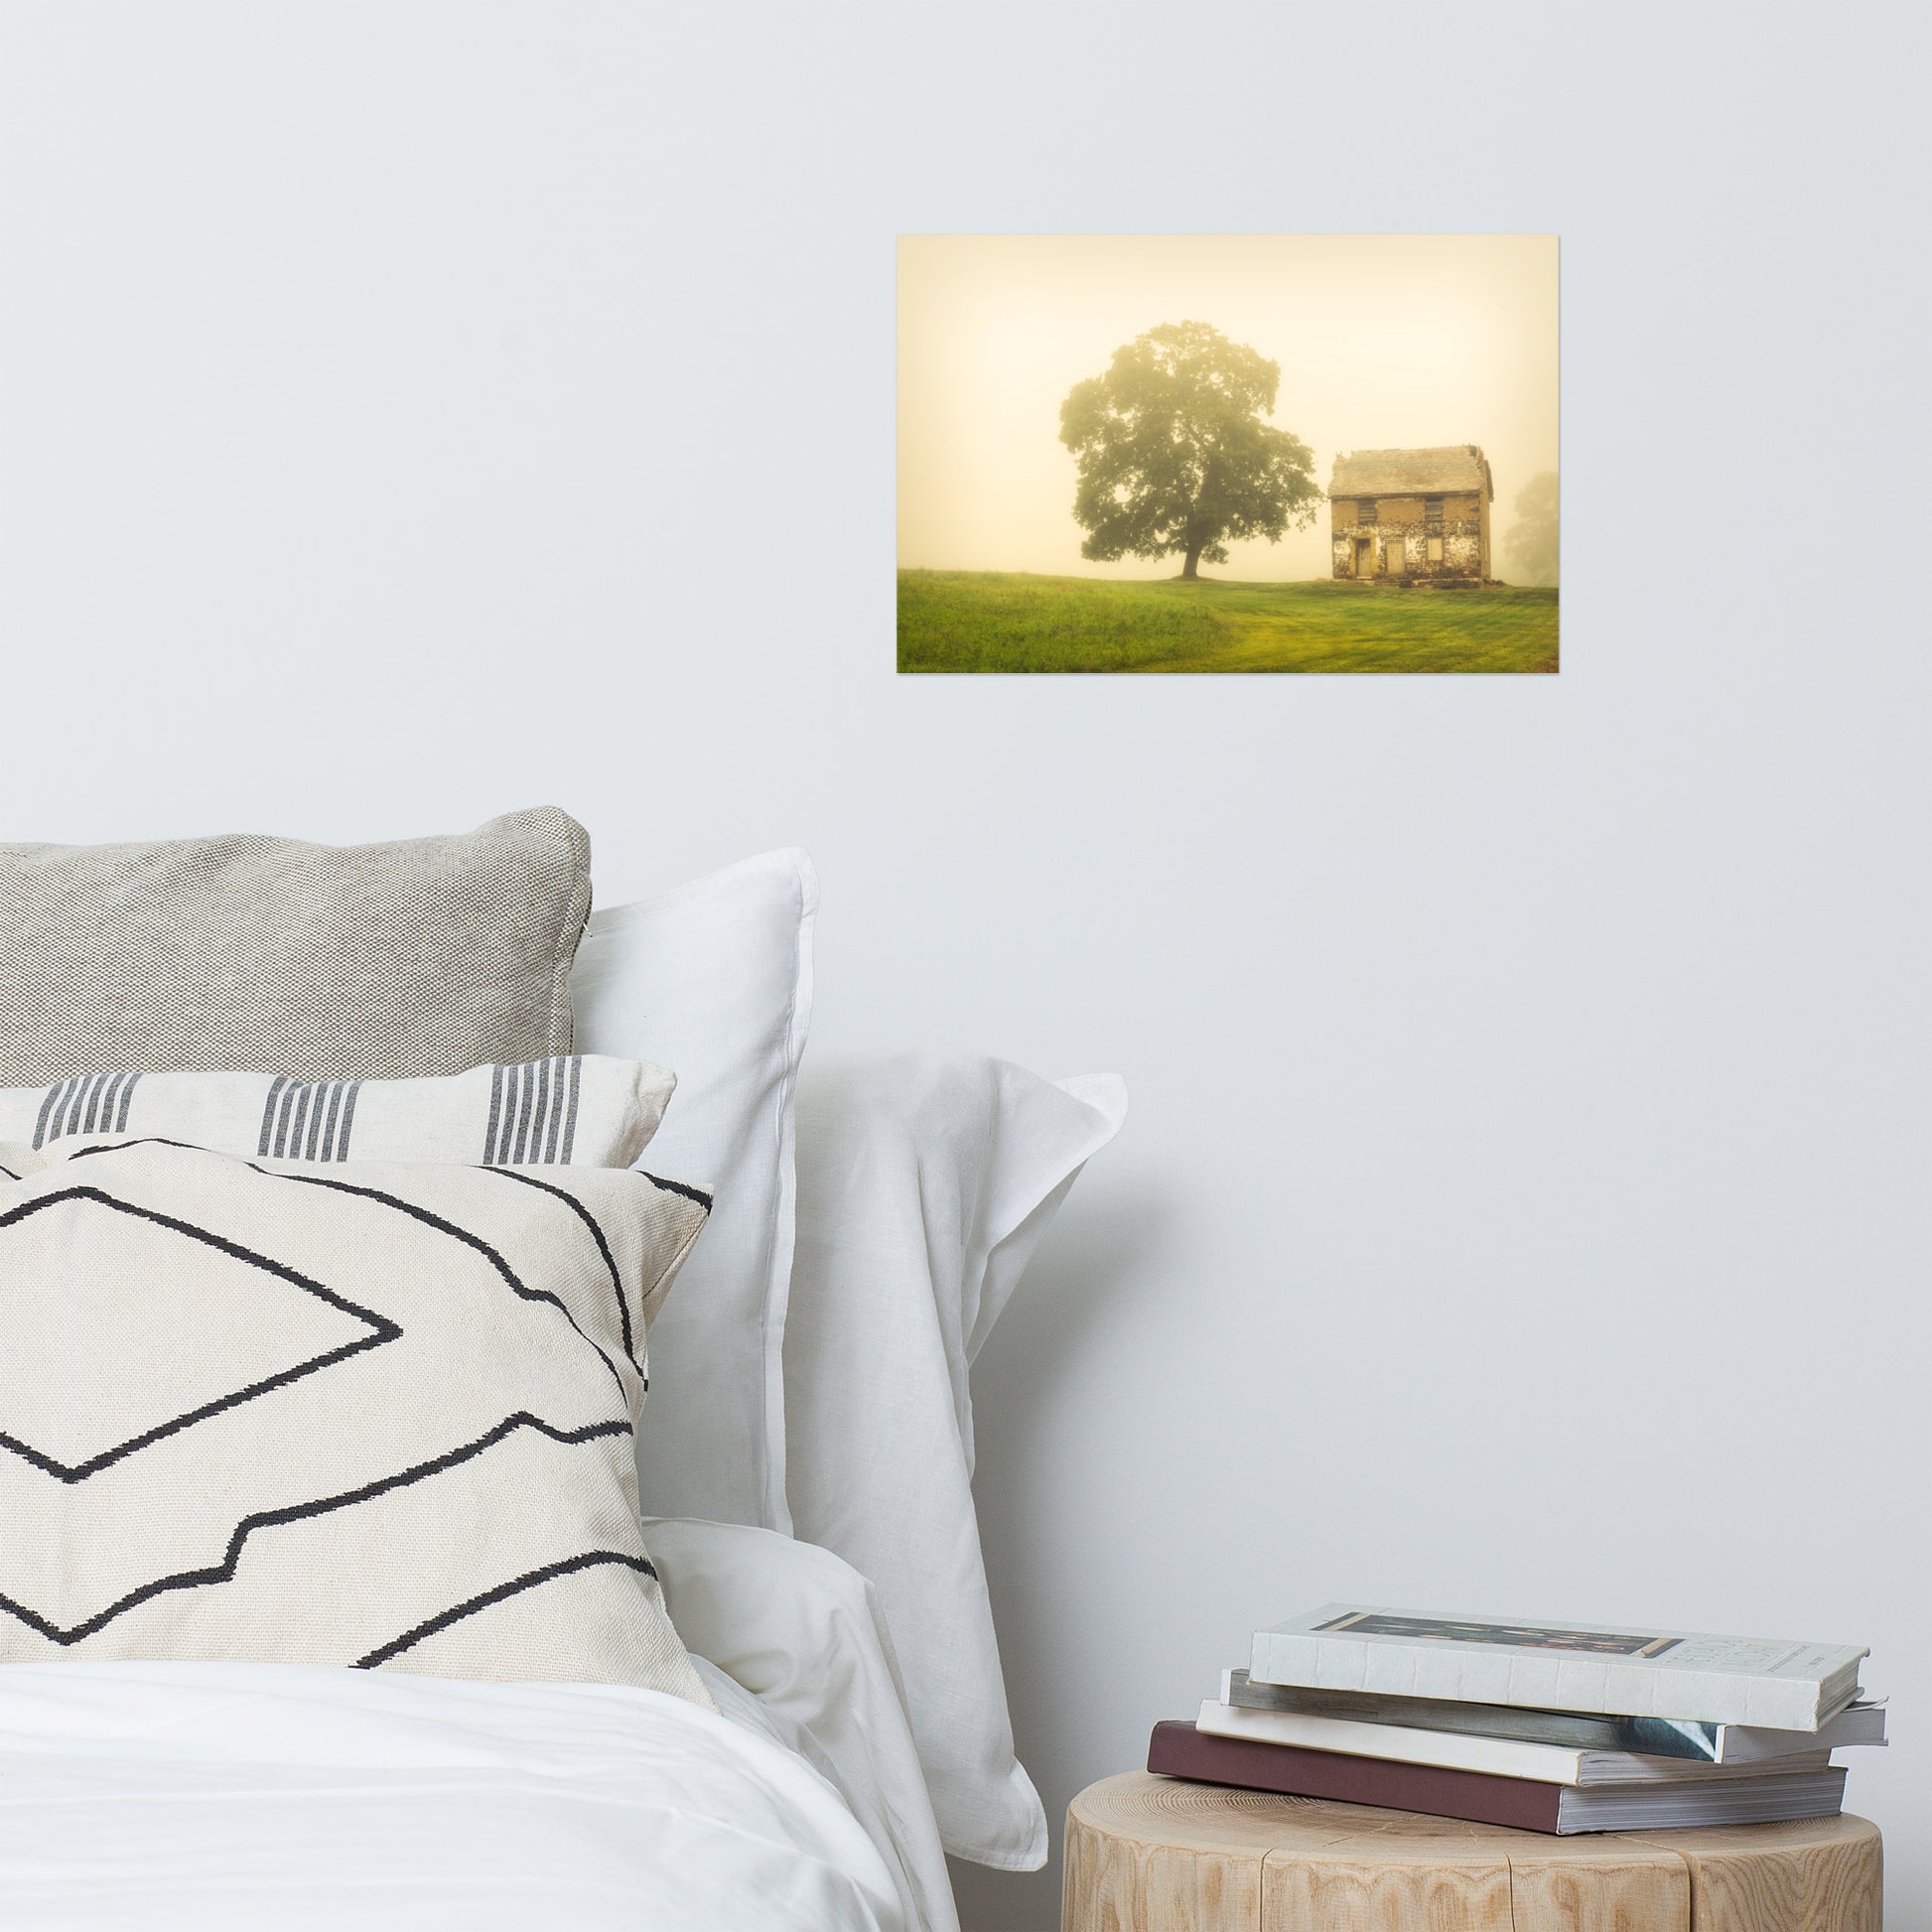 Bedroom Wall Decor Rustic: Old Farmhouse in Foggy Meadow Rustic - Rural / Country Style Landscape / Nature Photograph Loose / Unframed / Frameless / Frameable Wall Art Print - Artwork